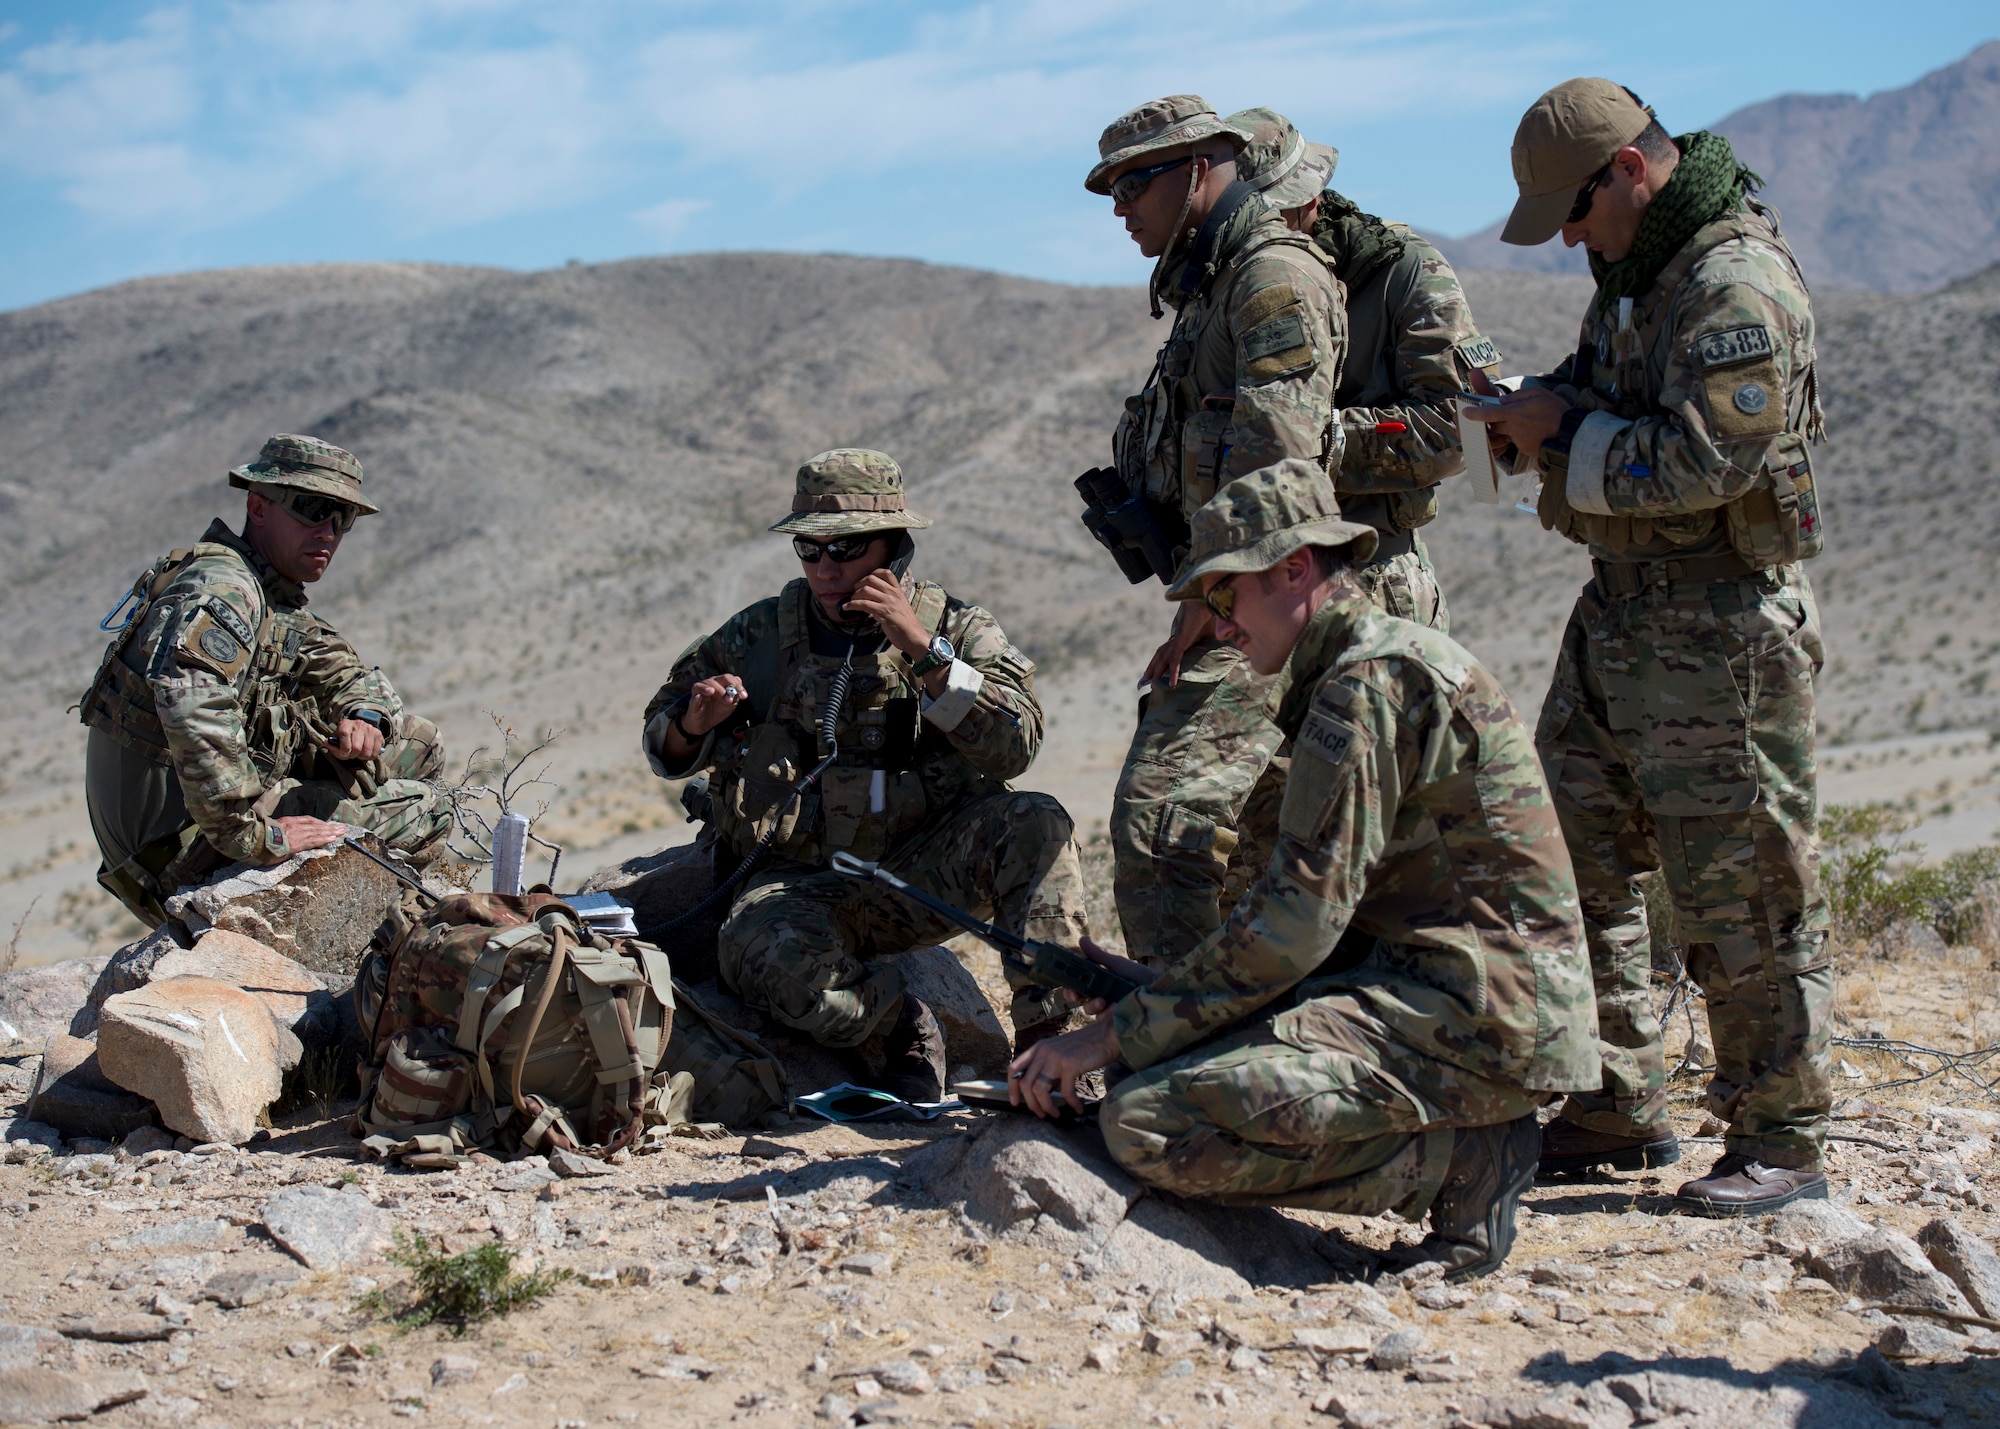 Capt. Robert Steiner, a tactical air control party specialist assigned to the 124th Air Support Operations Squadron, Idaho Air National Guard, assists the Brazilian Air Force TACPs  at the National Training Center, Fort Irwin, California, June 12, 2019. The Brazilian Air Force was training with the 124 ASOS TACPs and the 12th Combat Training Squadron TACPS during NTC. (U.S. Air National Guard photo by Senior Airman Mercedee Wilds)